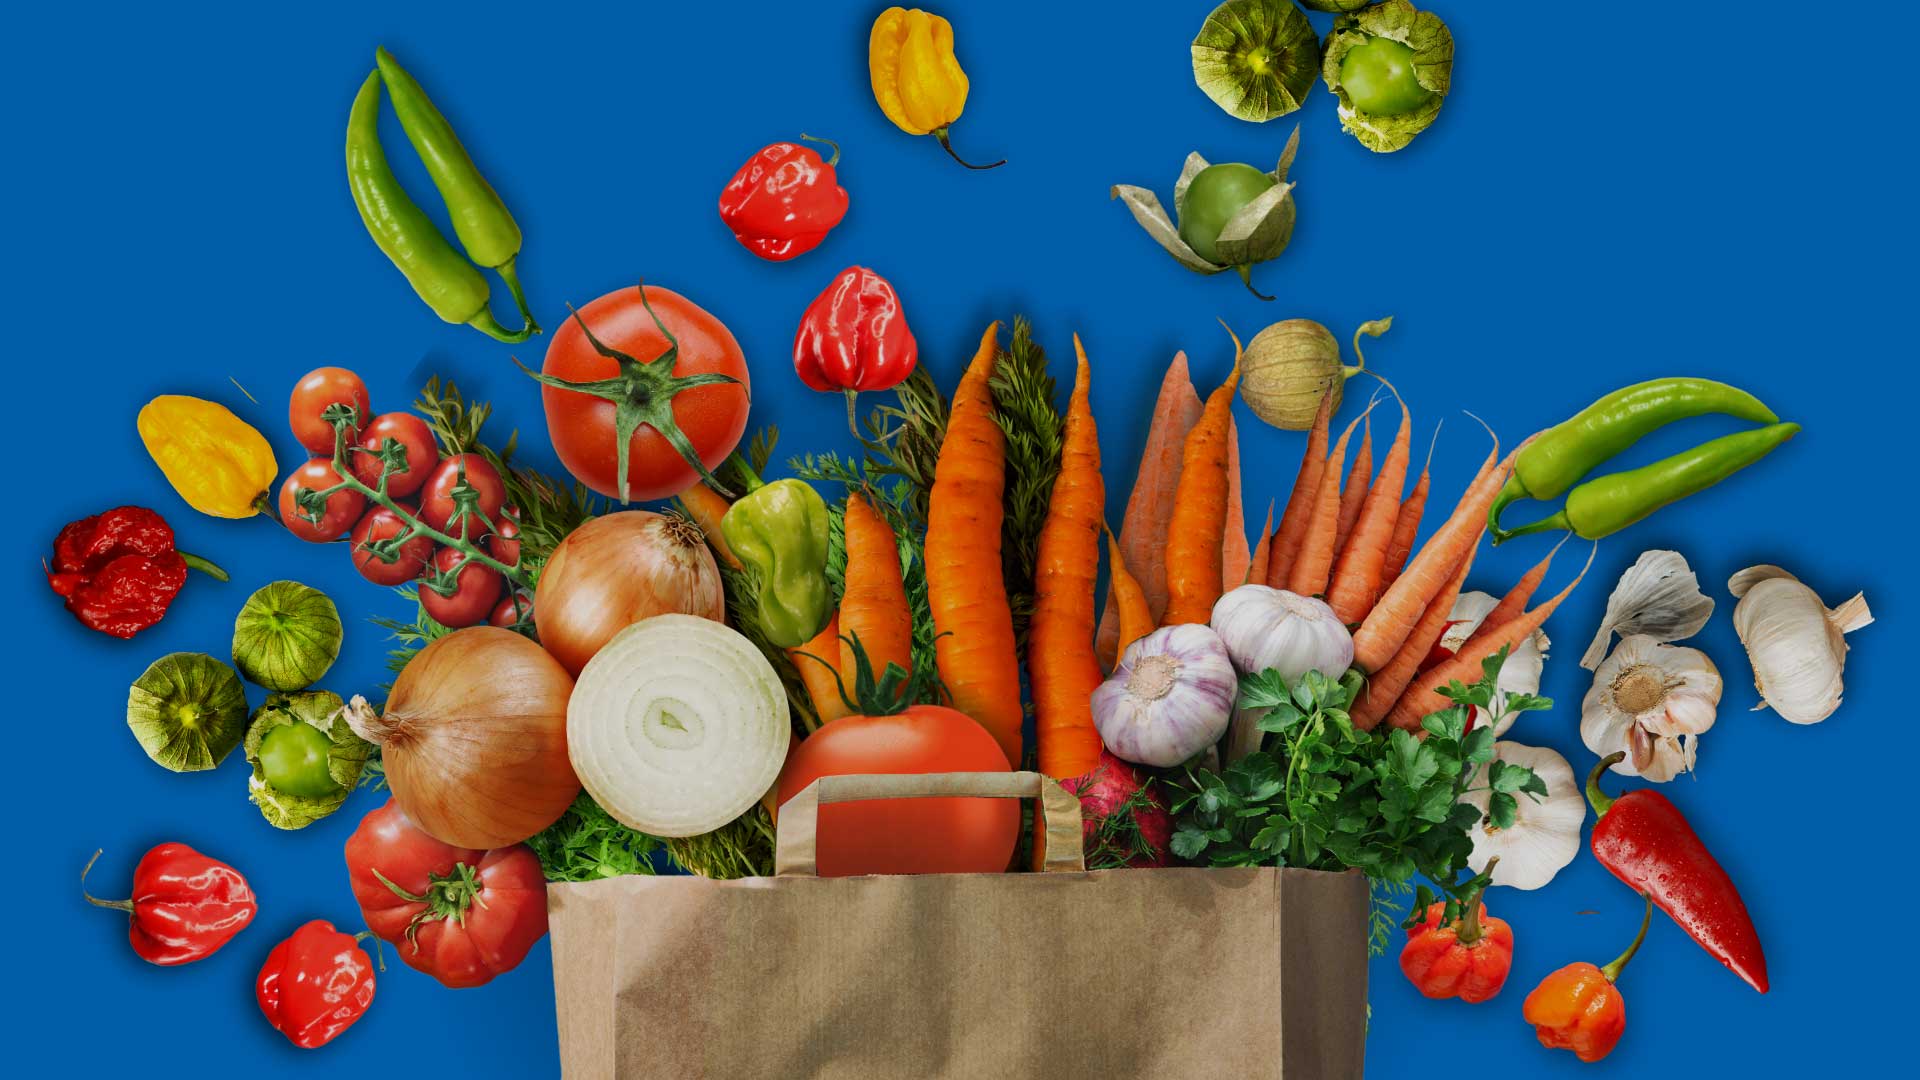 Grocery shopping bag with chilis and vegetables tumbling onto a blue table top.